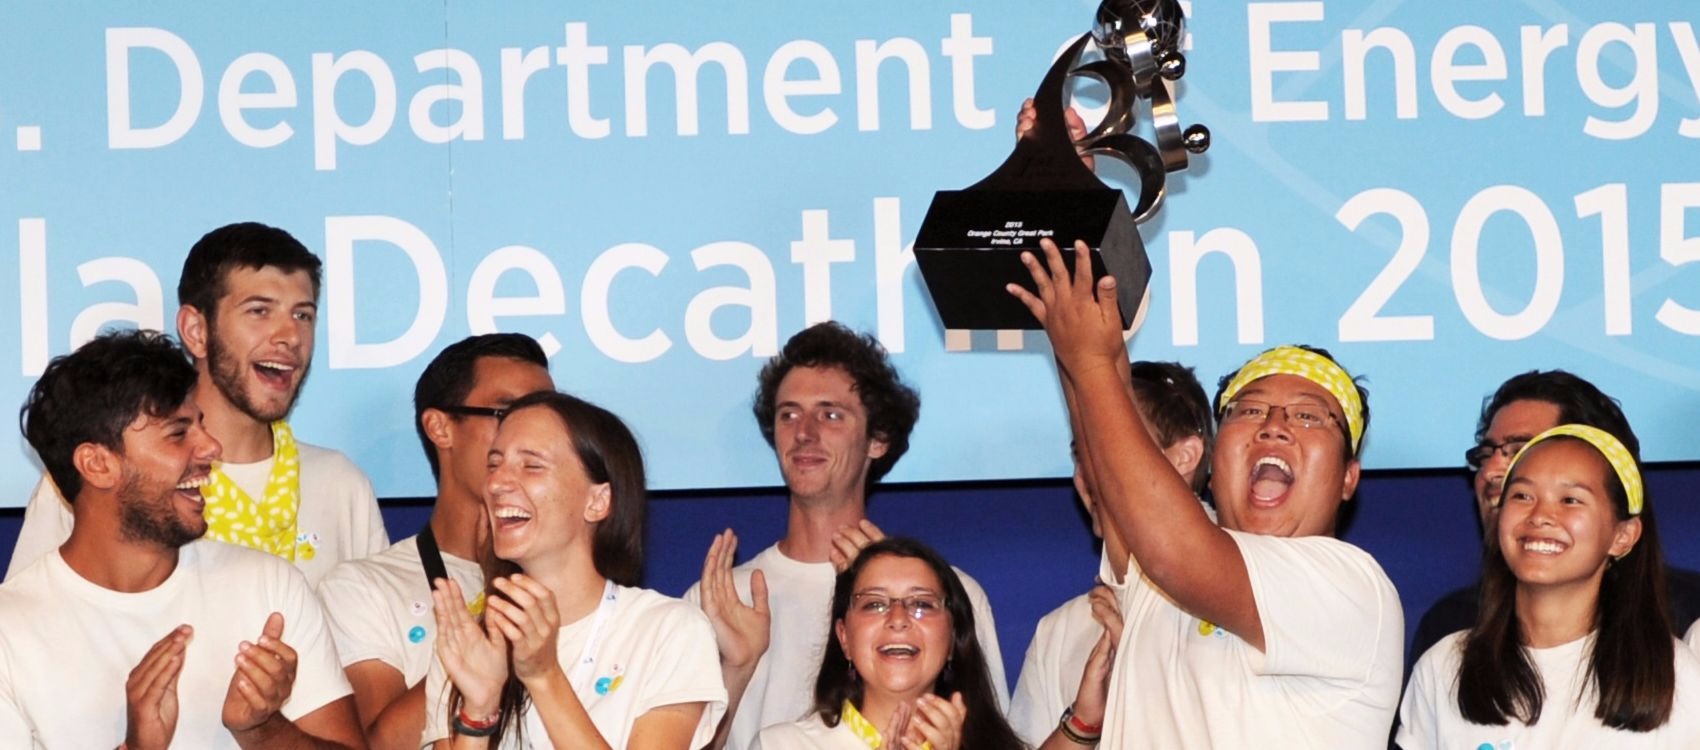 Photo of a group of young men and women wearing white t-shirts, standing in front of a stage back drop. One man is holding a large trophy overhead. This is the U.S. Department of Energy Solar Decathlon 2015 team from Stevens Institute of Technology celebrating its first-place win.